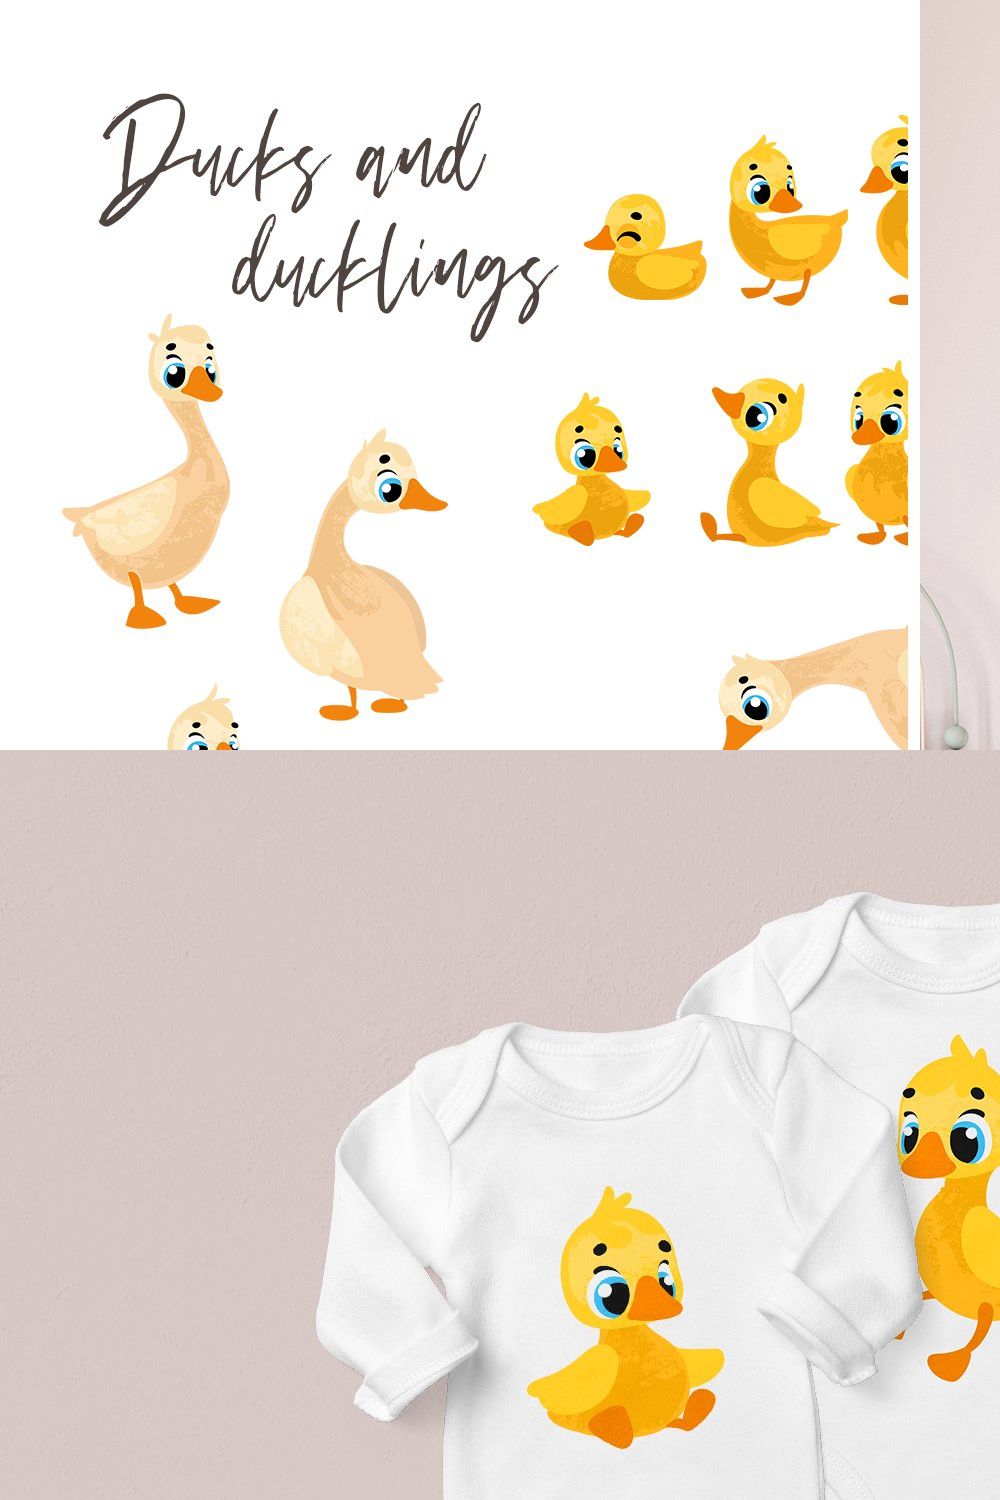 Ducks and ducklings pinterest preview image.